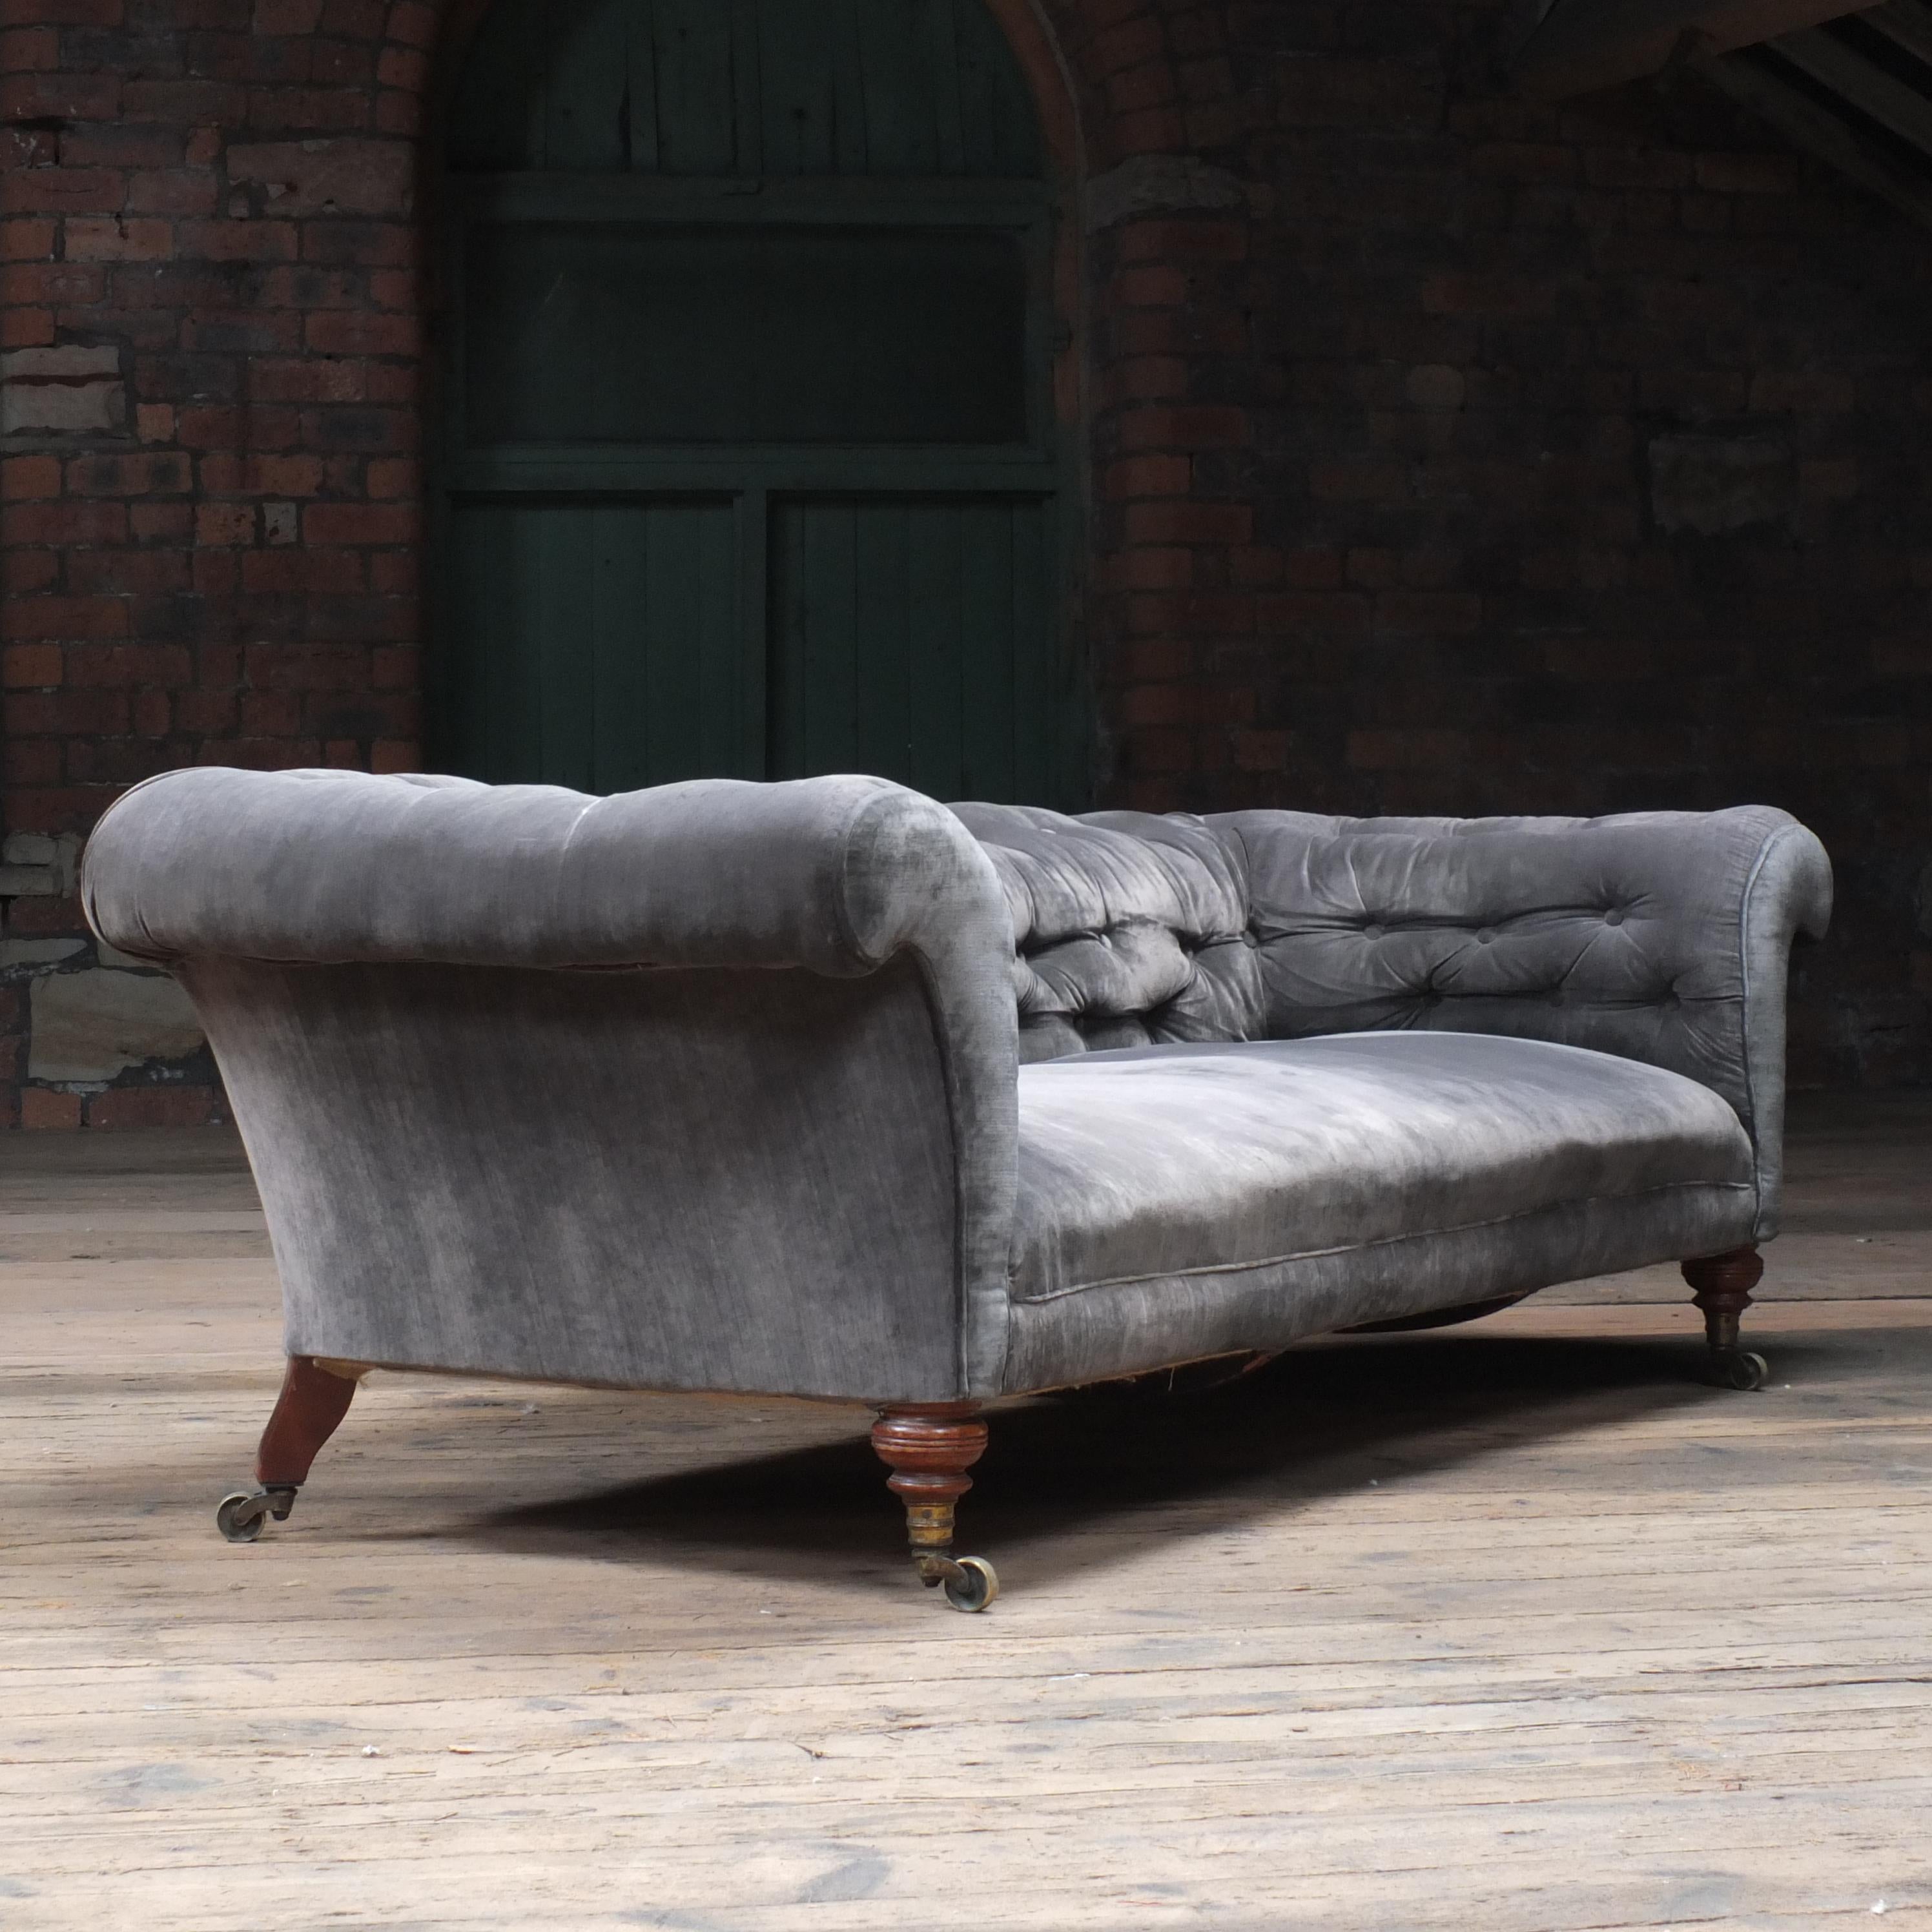 Late Victorian Antique English Chesterfield Sofa by Howard and Sons c1880 (INC UPHOLSTERY